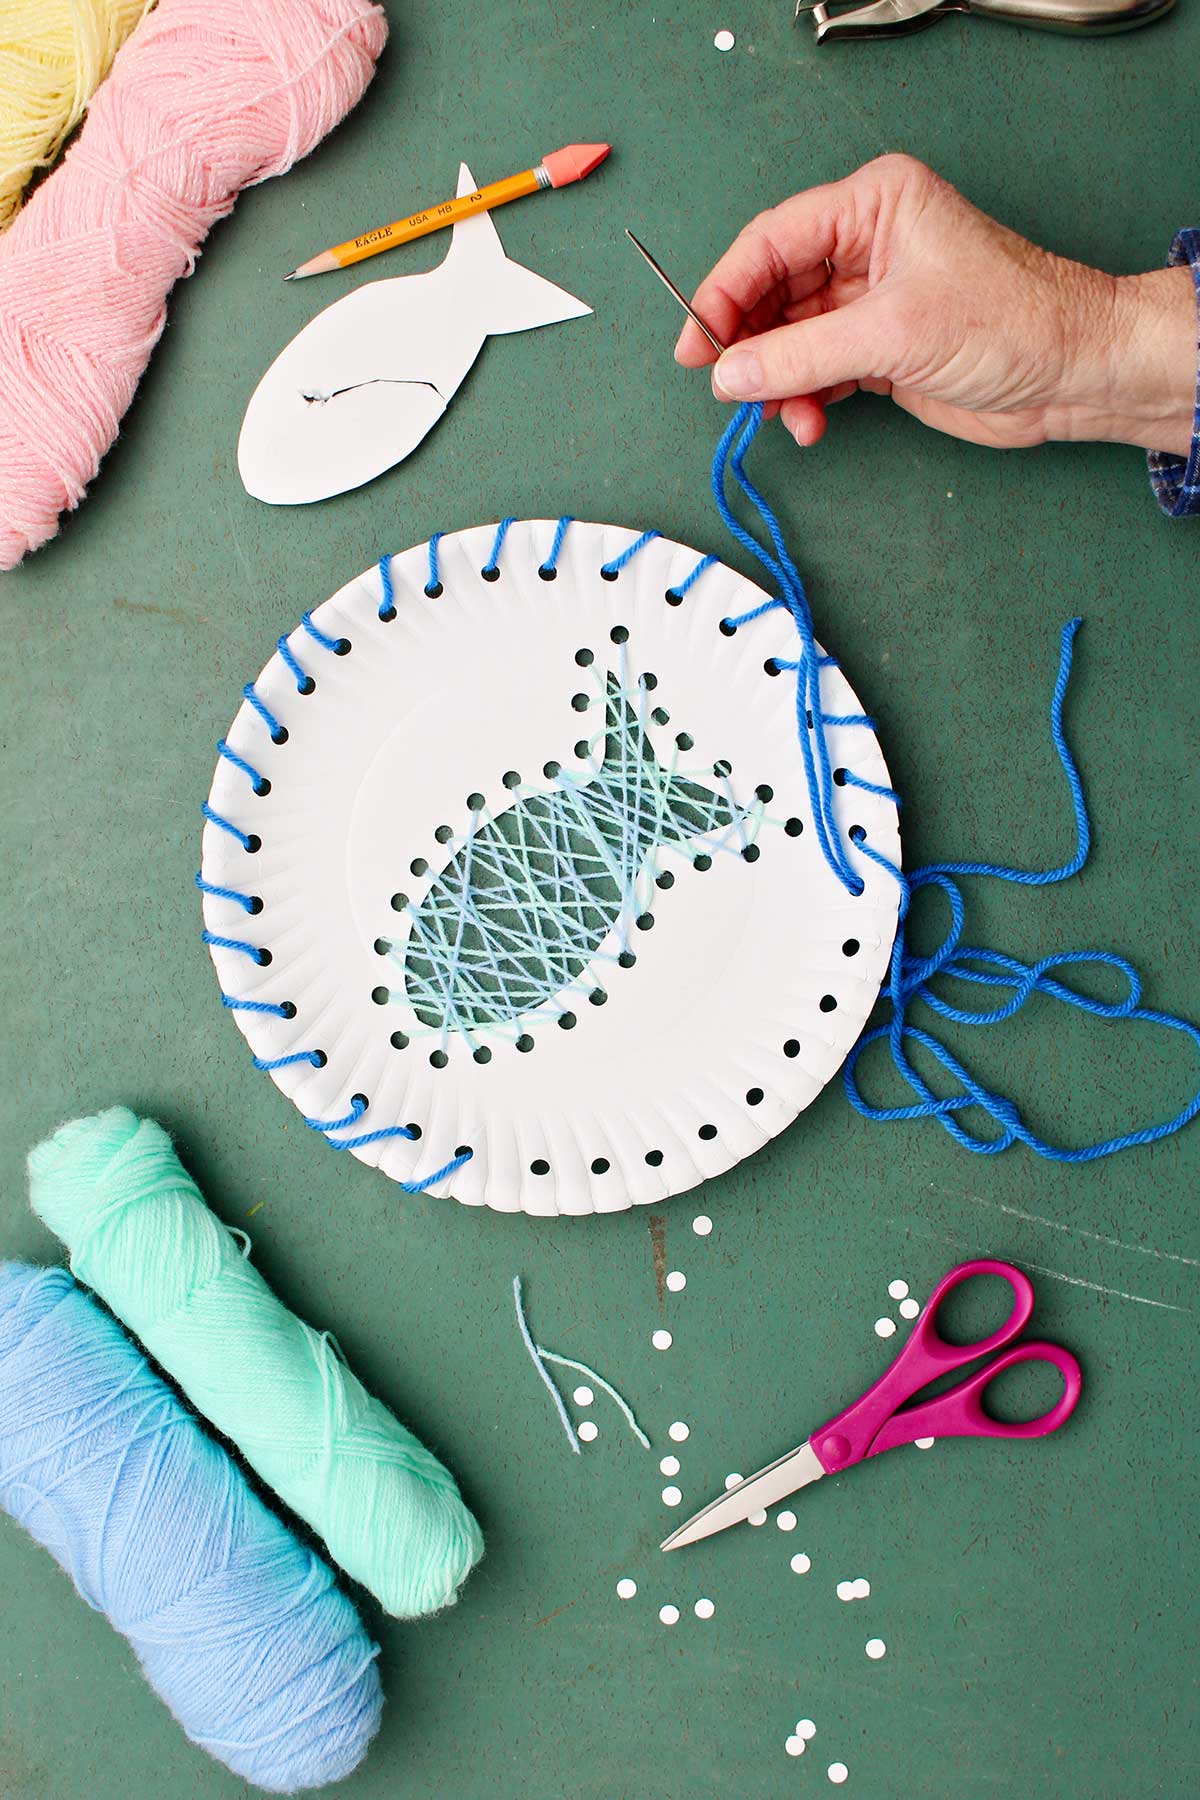 Hand threading blue yarn through holes on the outside of paper plate with other supplies near by.